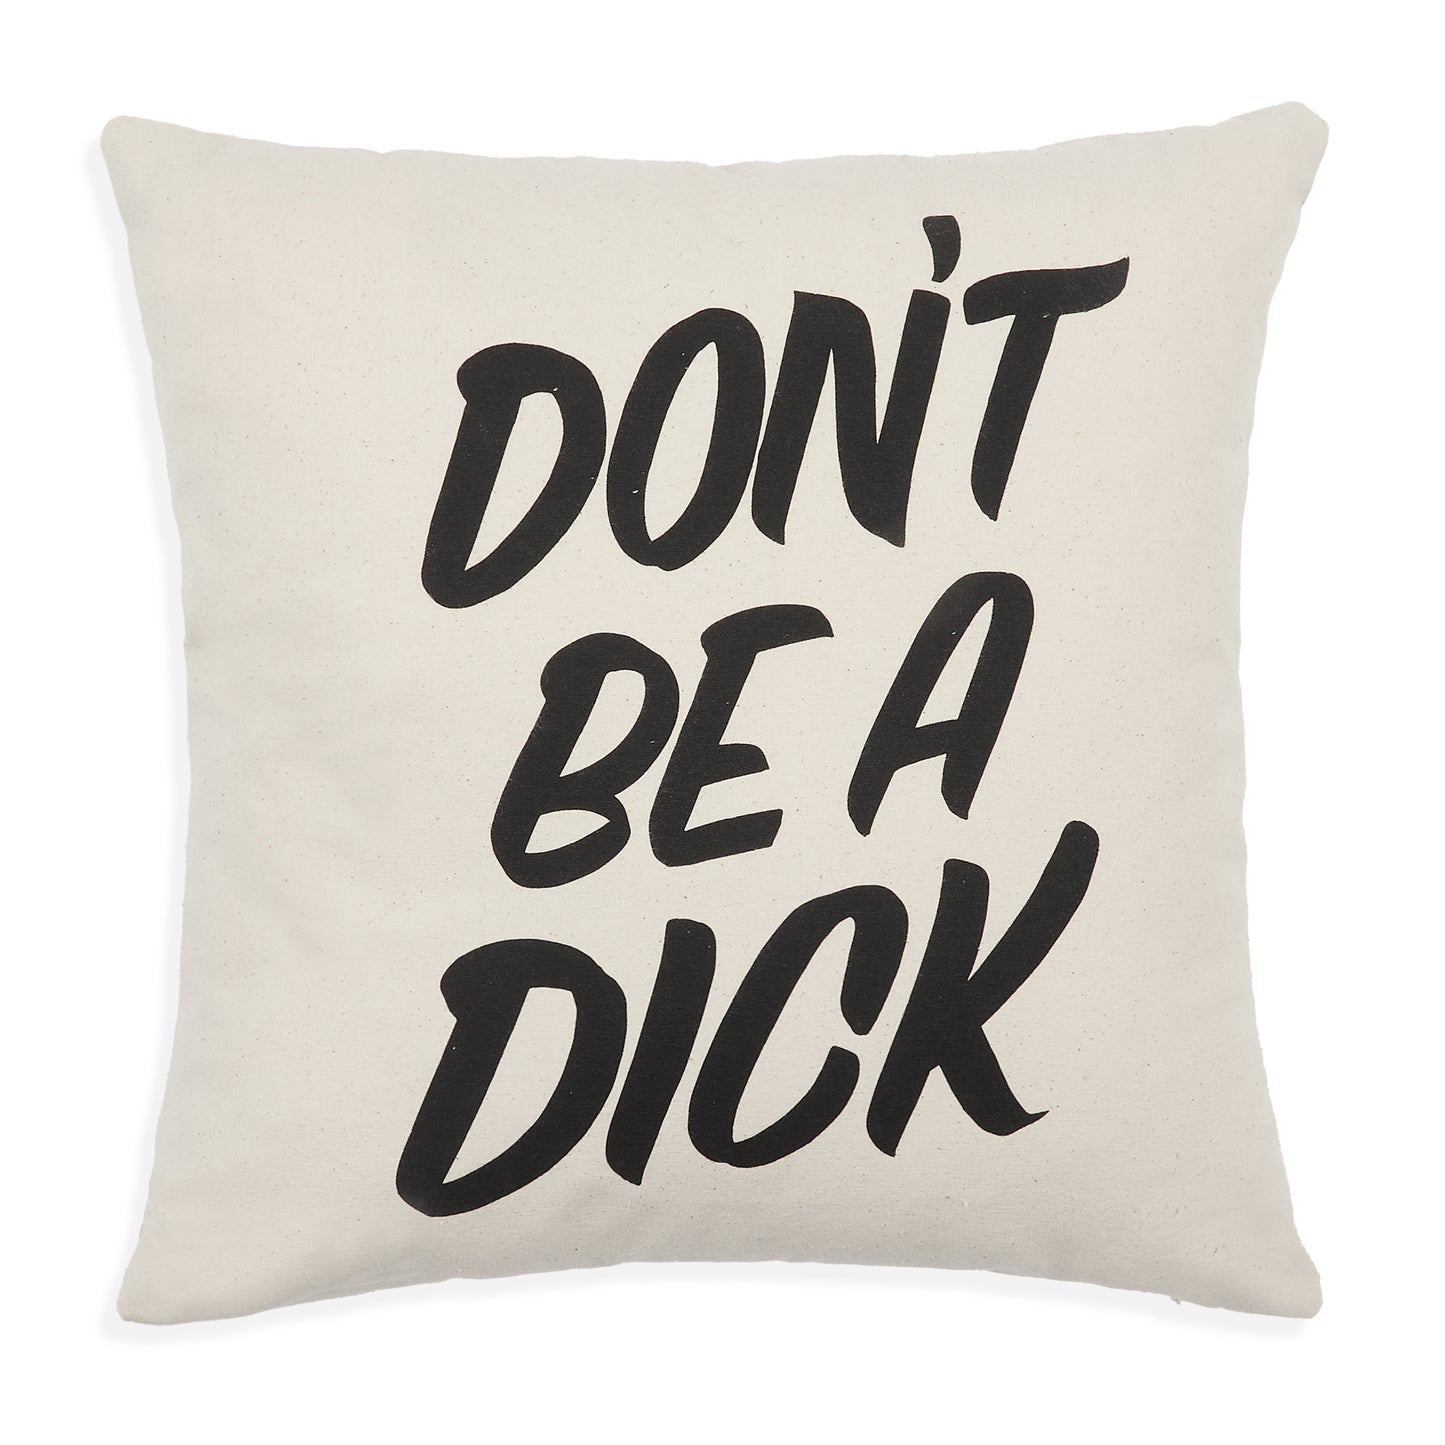 Don't Be A Dick. Cushion.